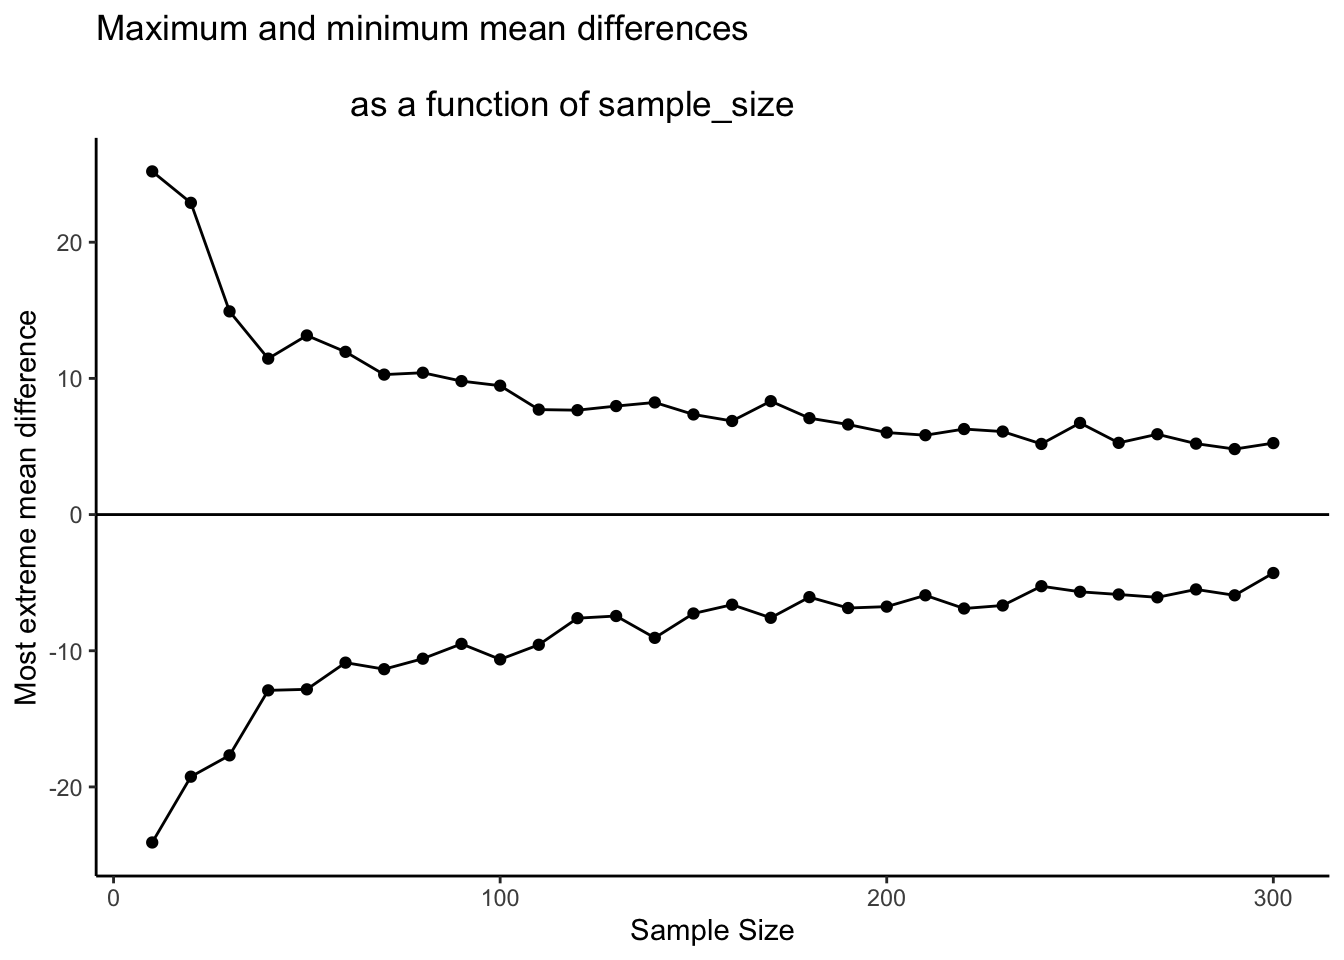 A graph of the maximum and minimum mean differences produced by chance as a function of sample-size.